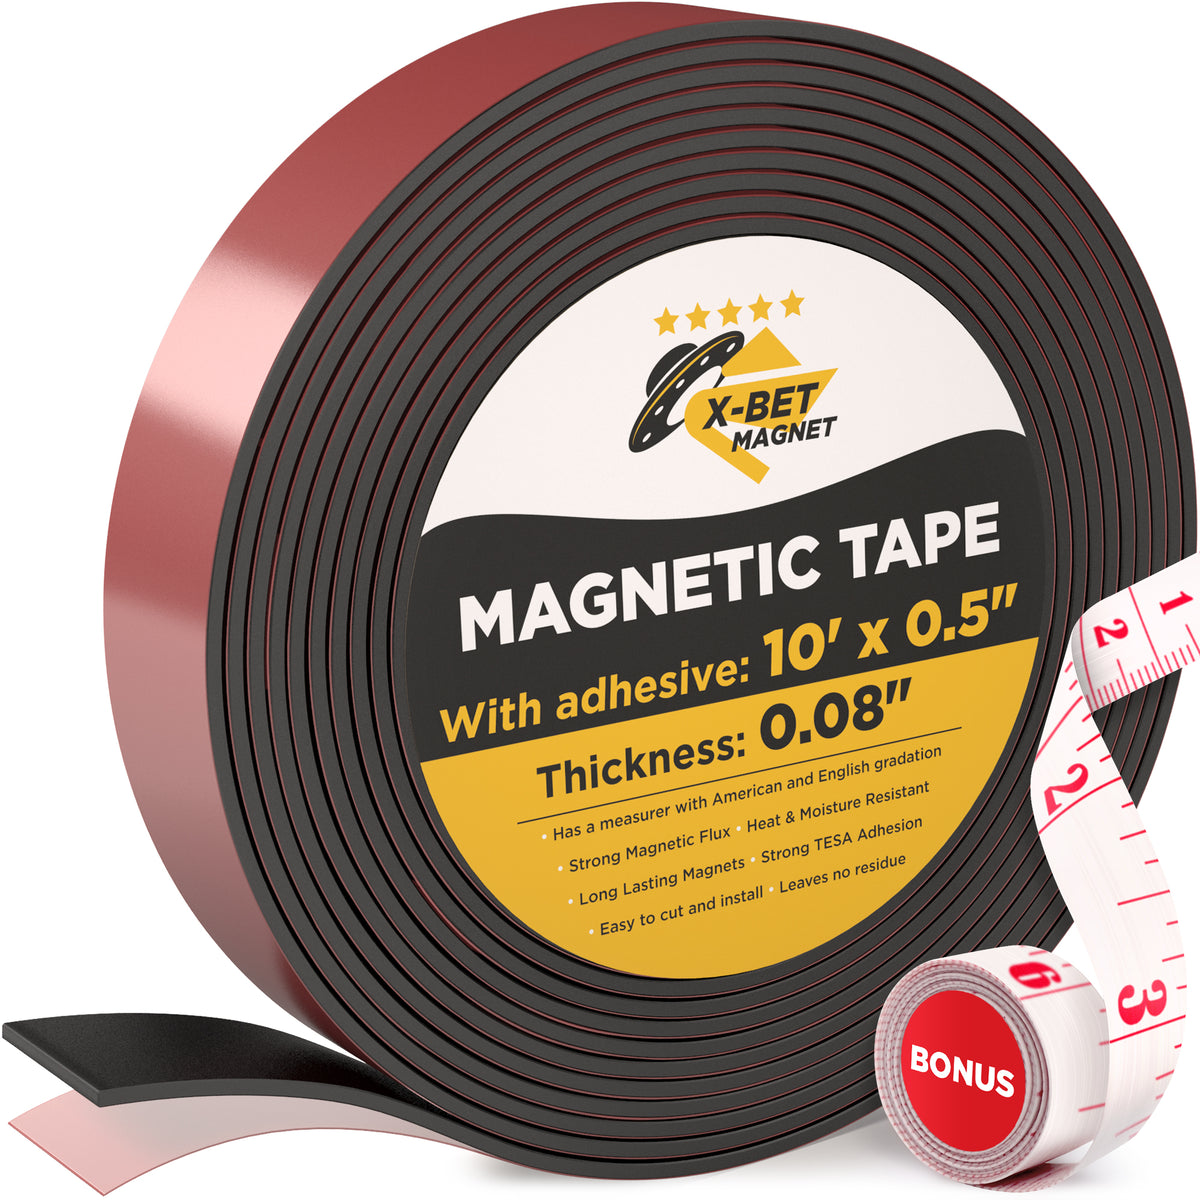  Magnetic Tape, 12 Feet Magnet Tape Roll (1'' Wide x 12 ft  Long), with 3M Strong Adhesive Backing. Perfect for DIY, Art Projects,  whiteboards & Fridge Organization : Office Products